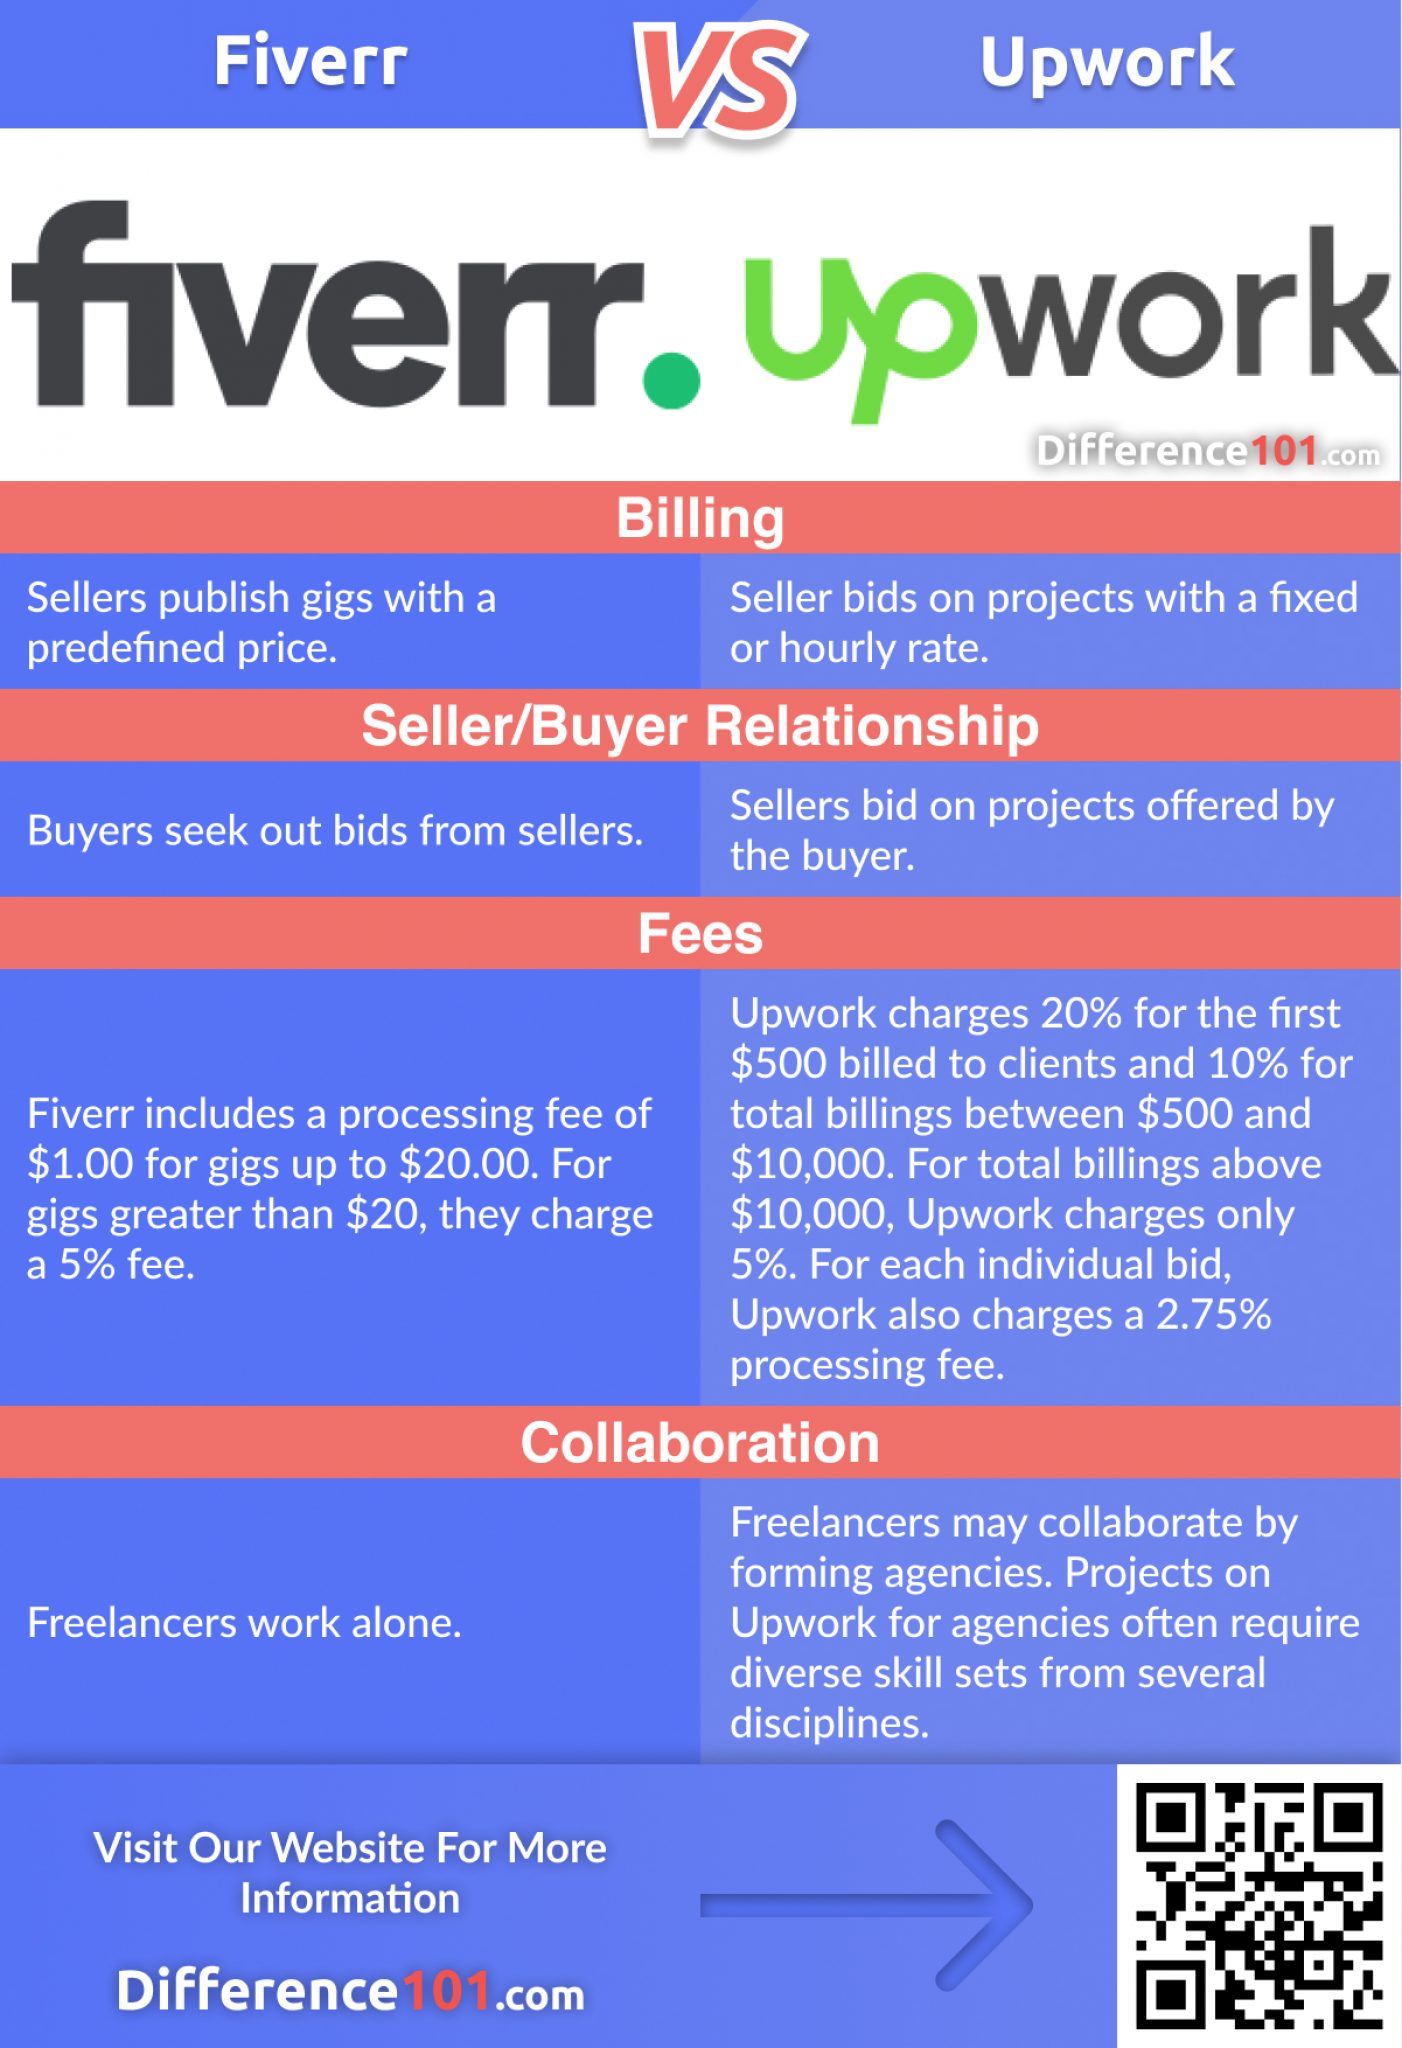 Learn the Differences Between Fiverr and Upwork on Quora